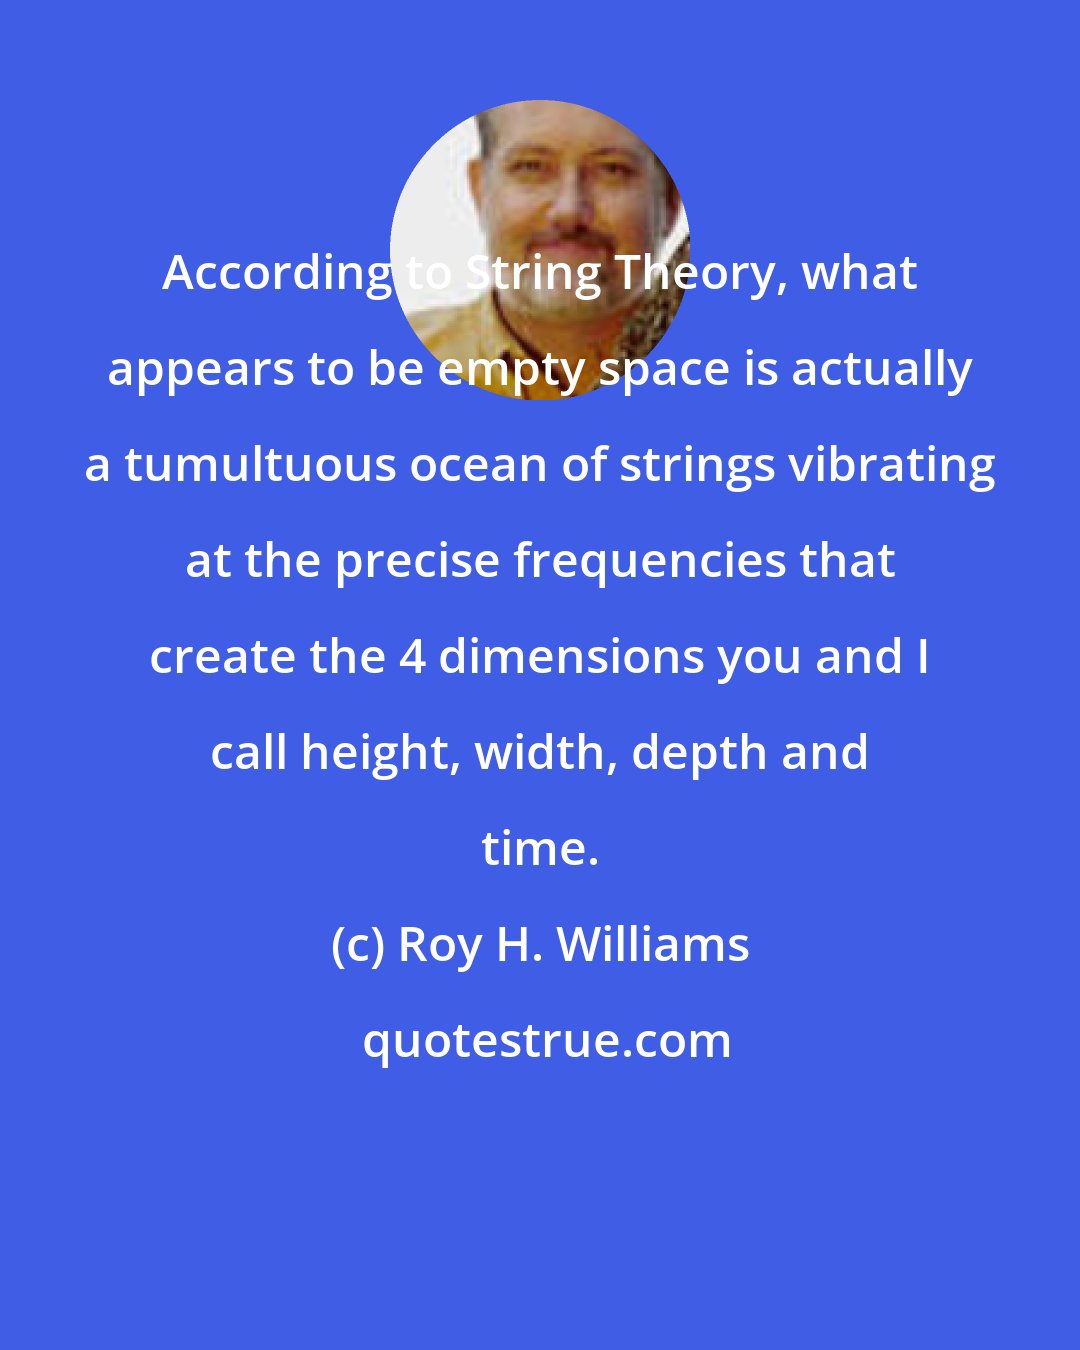 Roy H. Williams: According to String Theory, what appears to be empty space is actually a tumultuous ocean of strings vibrating at the precise frequencies that create the 4 dimensions you and I call height, width, depth and time.